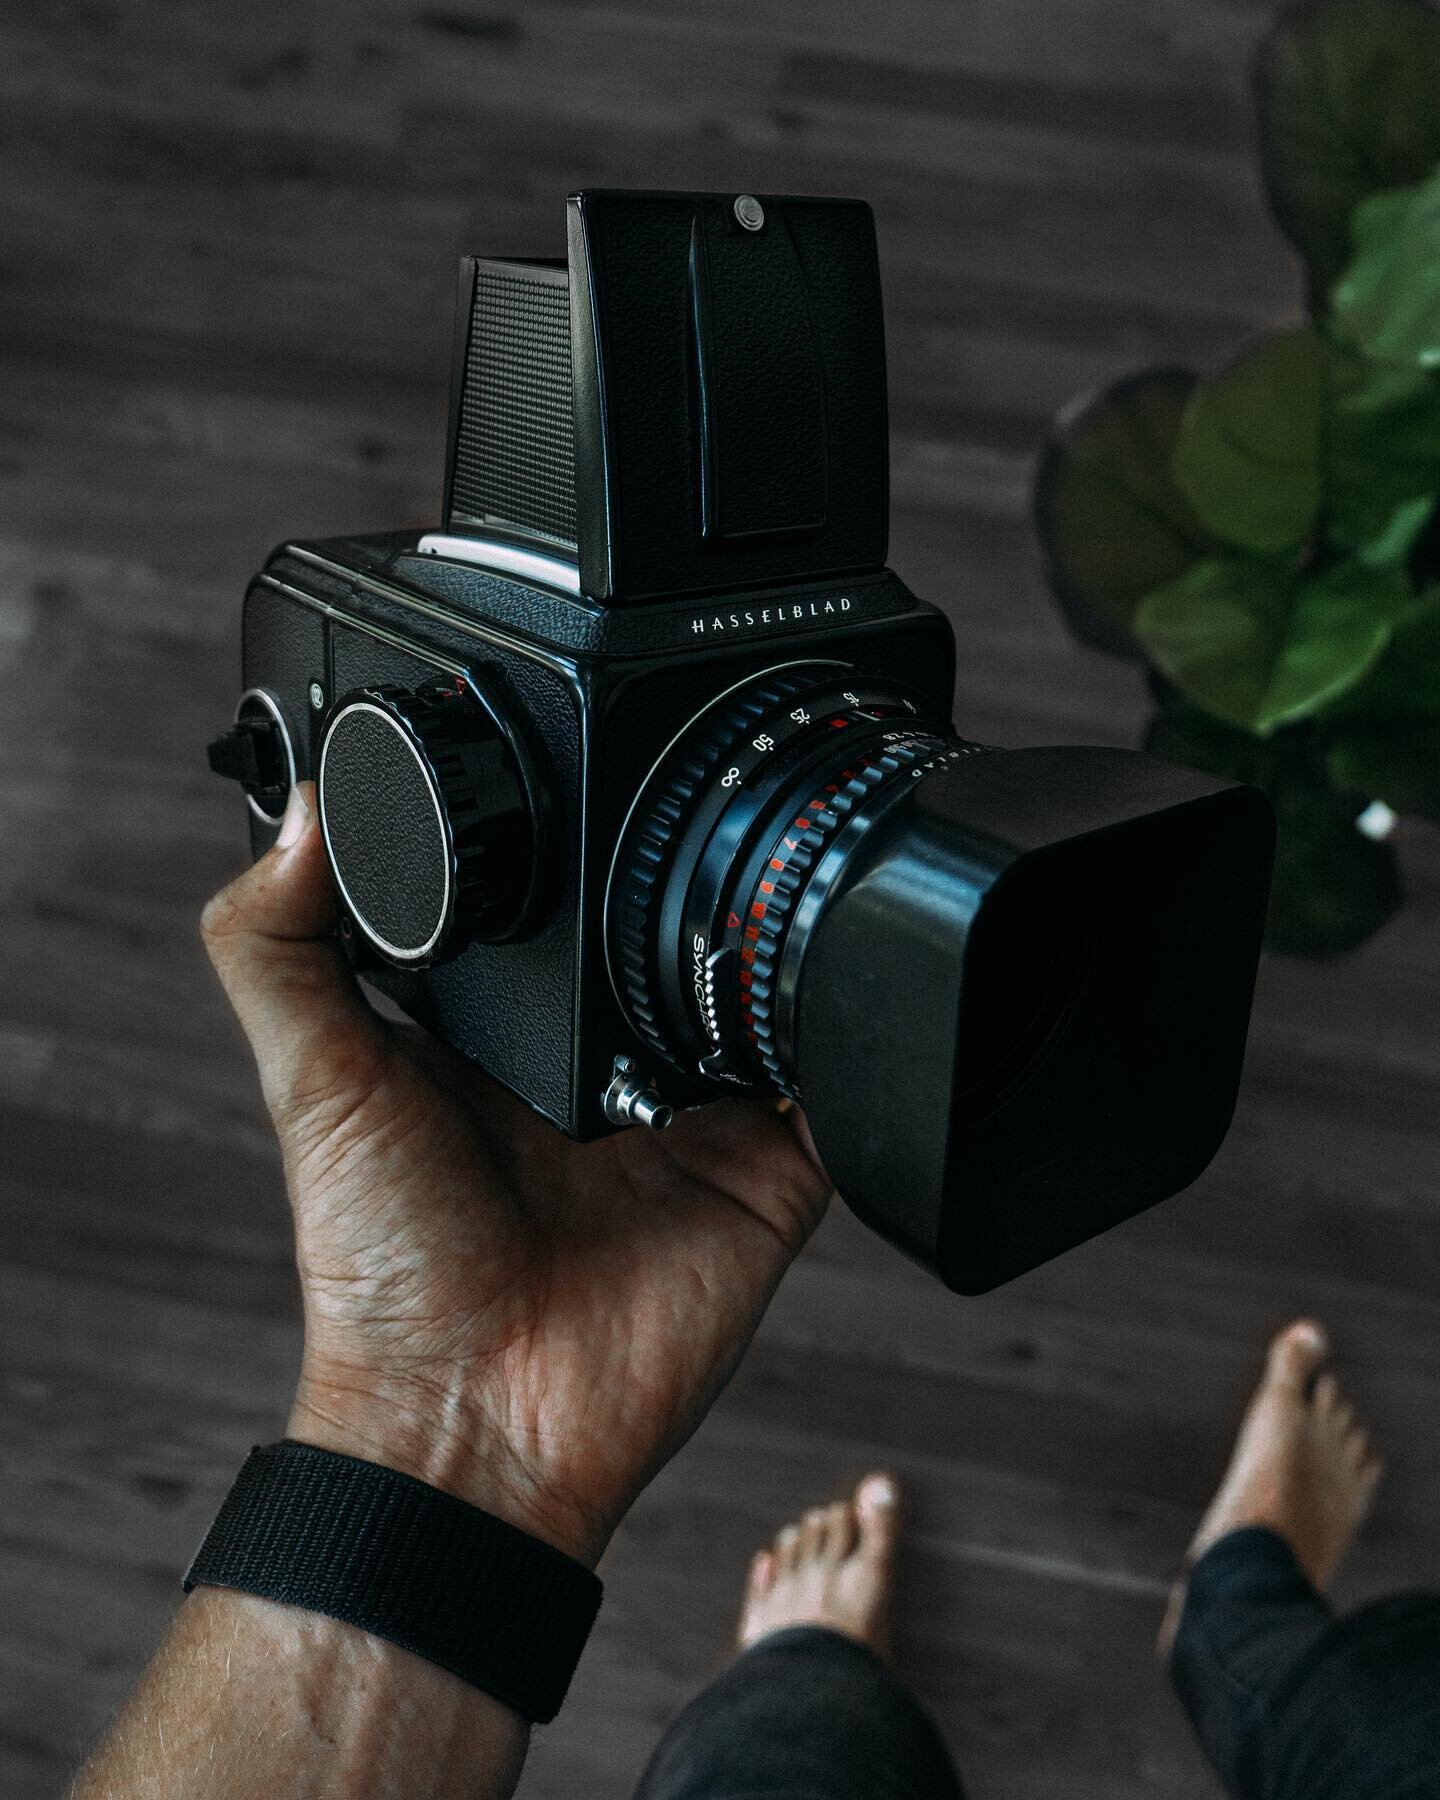 I really want to start shooting with this beast of a camera. Anyone have any experience shooting film?
.
.
.
#hasselblad500cm #hasselblad #mediumformat #filmisnotdead #filmphotography